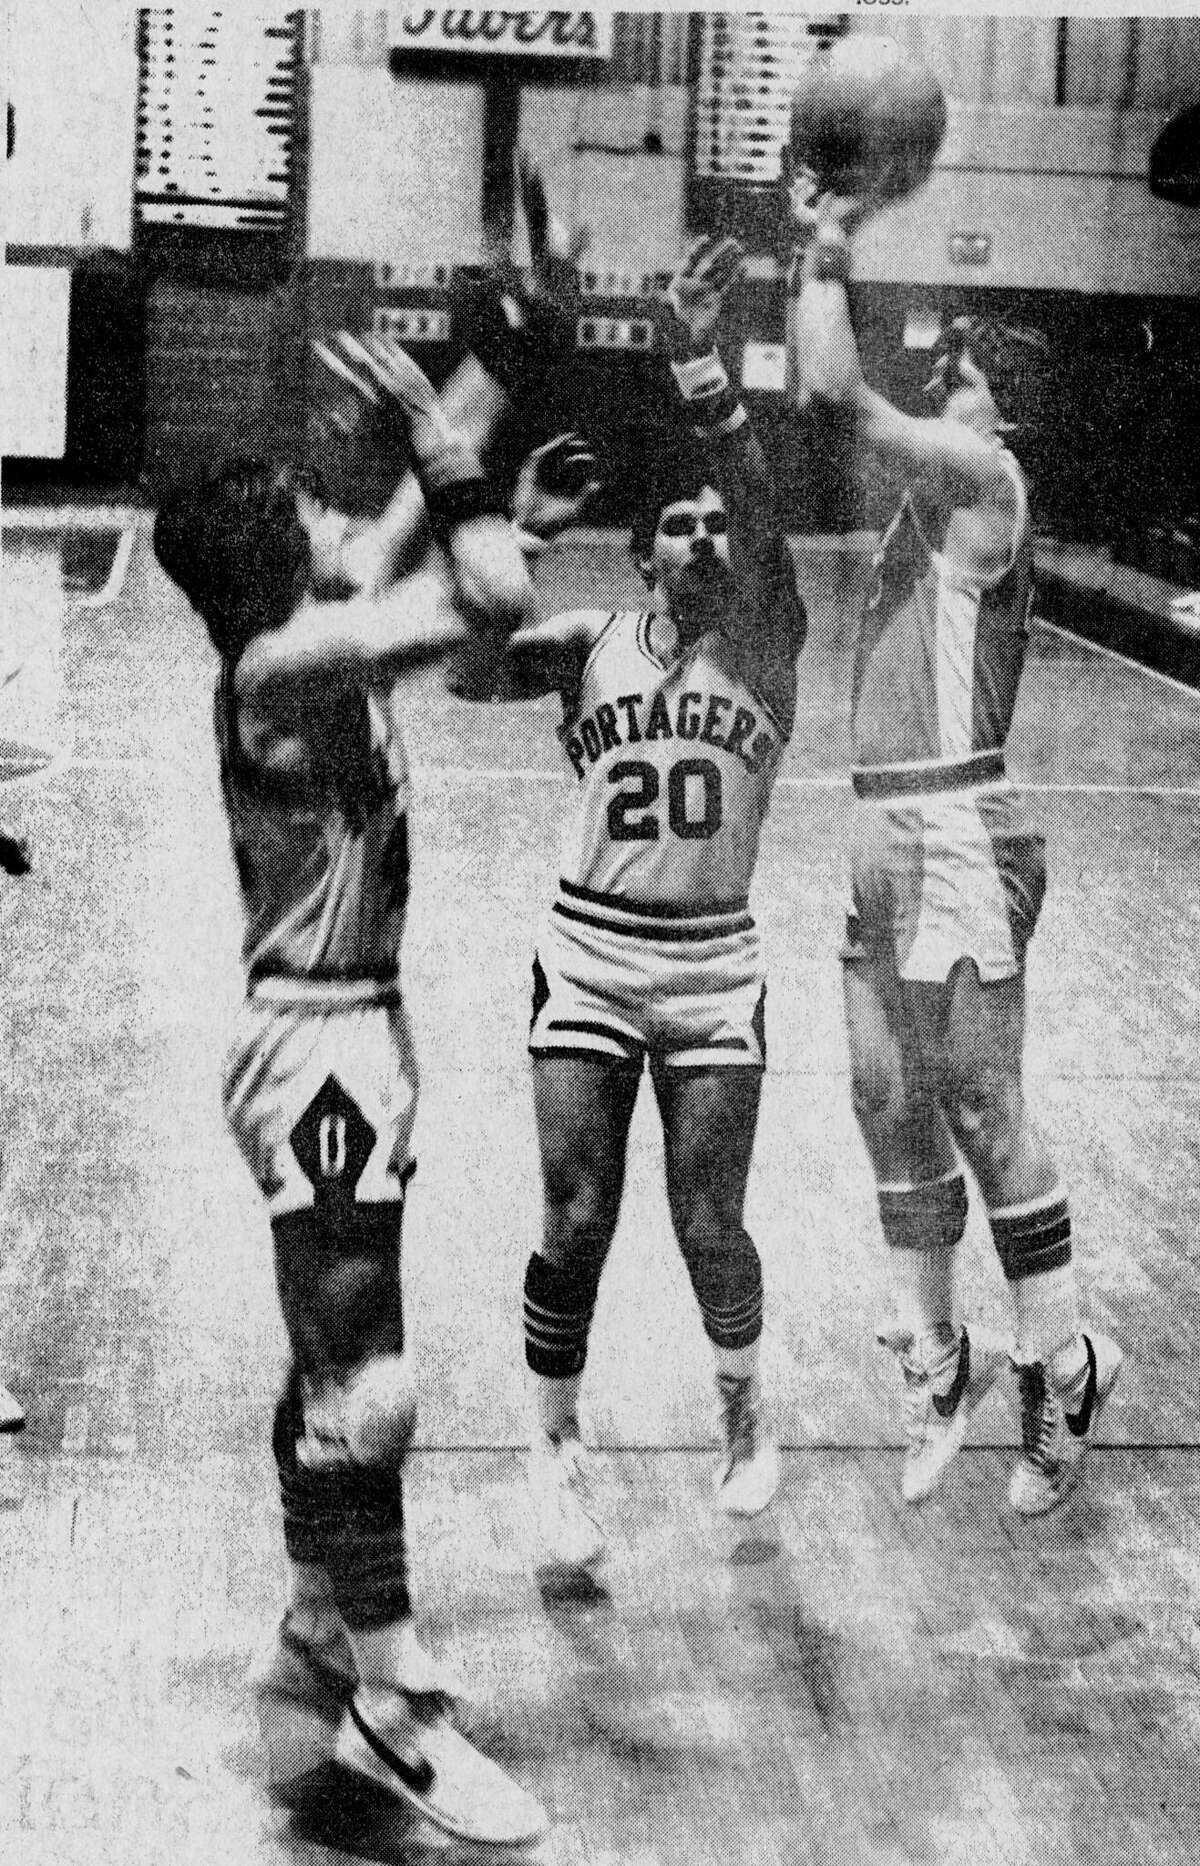 Ron Miller was top cat for the Brethren Bobcats in last week's consolation game of the Manistee County Holiday Basketball Classic played at Manistee Catholic Central. The photo was published in the News Advocate on Jan. 3, 1983.